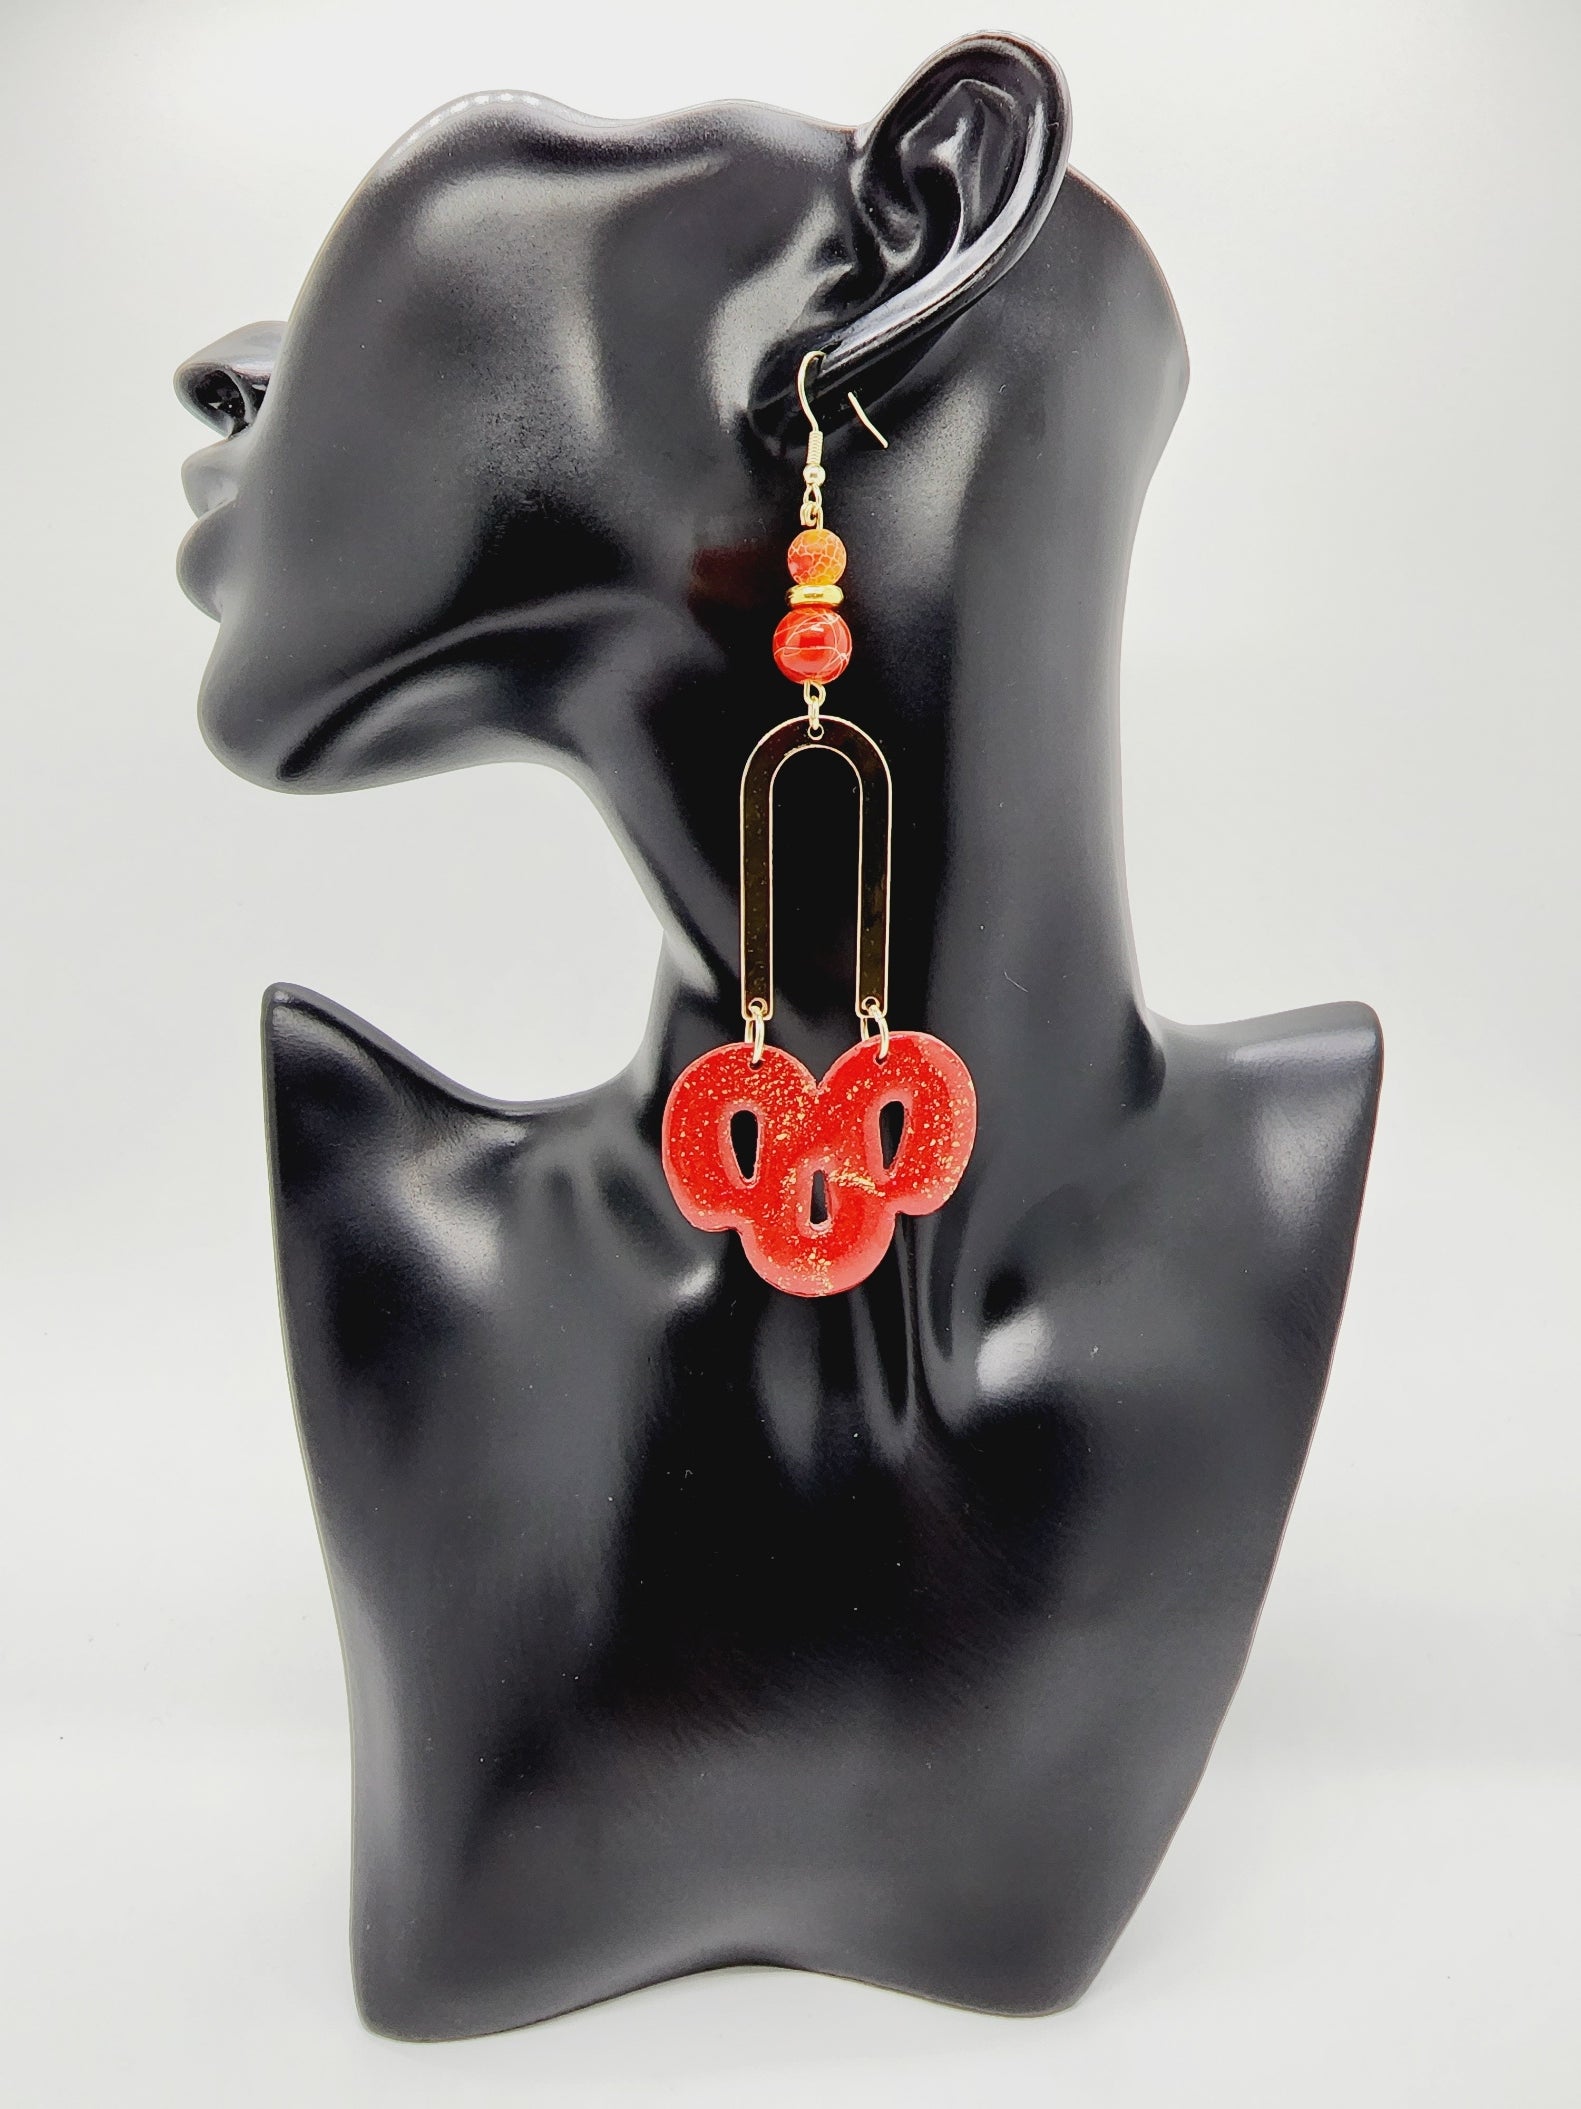 Length: 3.5 inches | Weight: 0.6 ounces   Distinctly You! These handmade earrings are made using red and gold polymer clay, red swirl beads, and hypoallergenic hooks with back closures. 